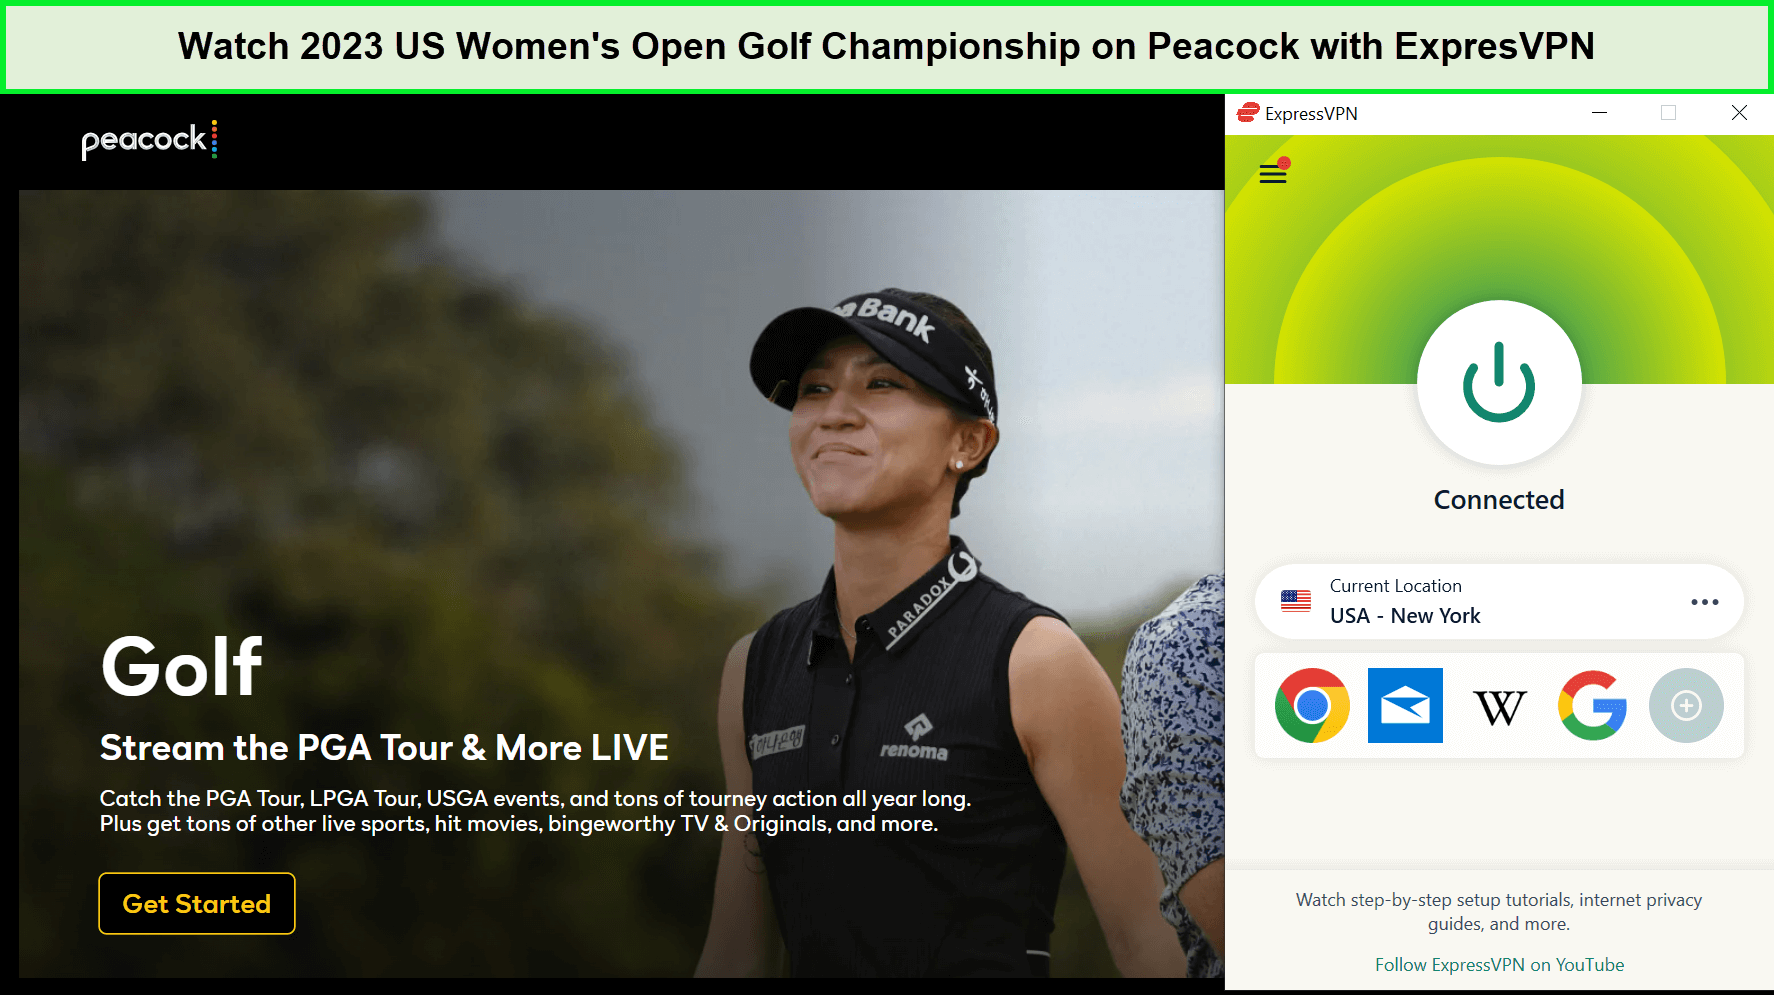 Watch-2023-US-Womens-Open-Golf-Championship-in-Hong Kong-on-Peacock-with-ExpresVPN